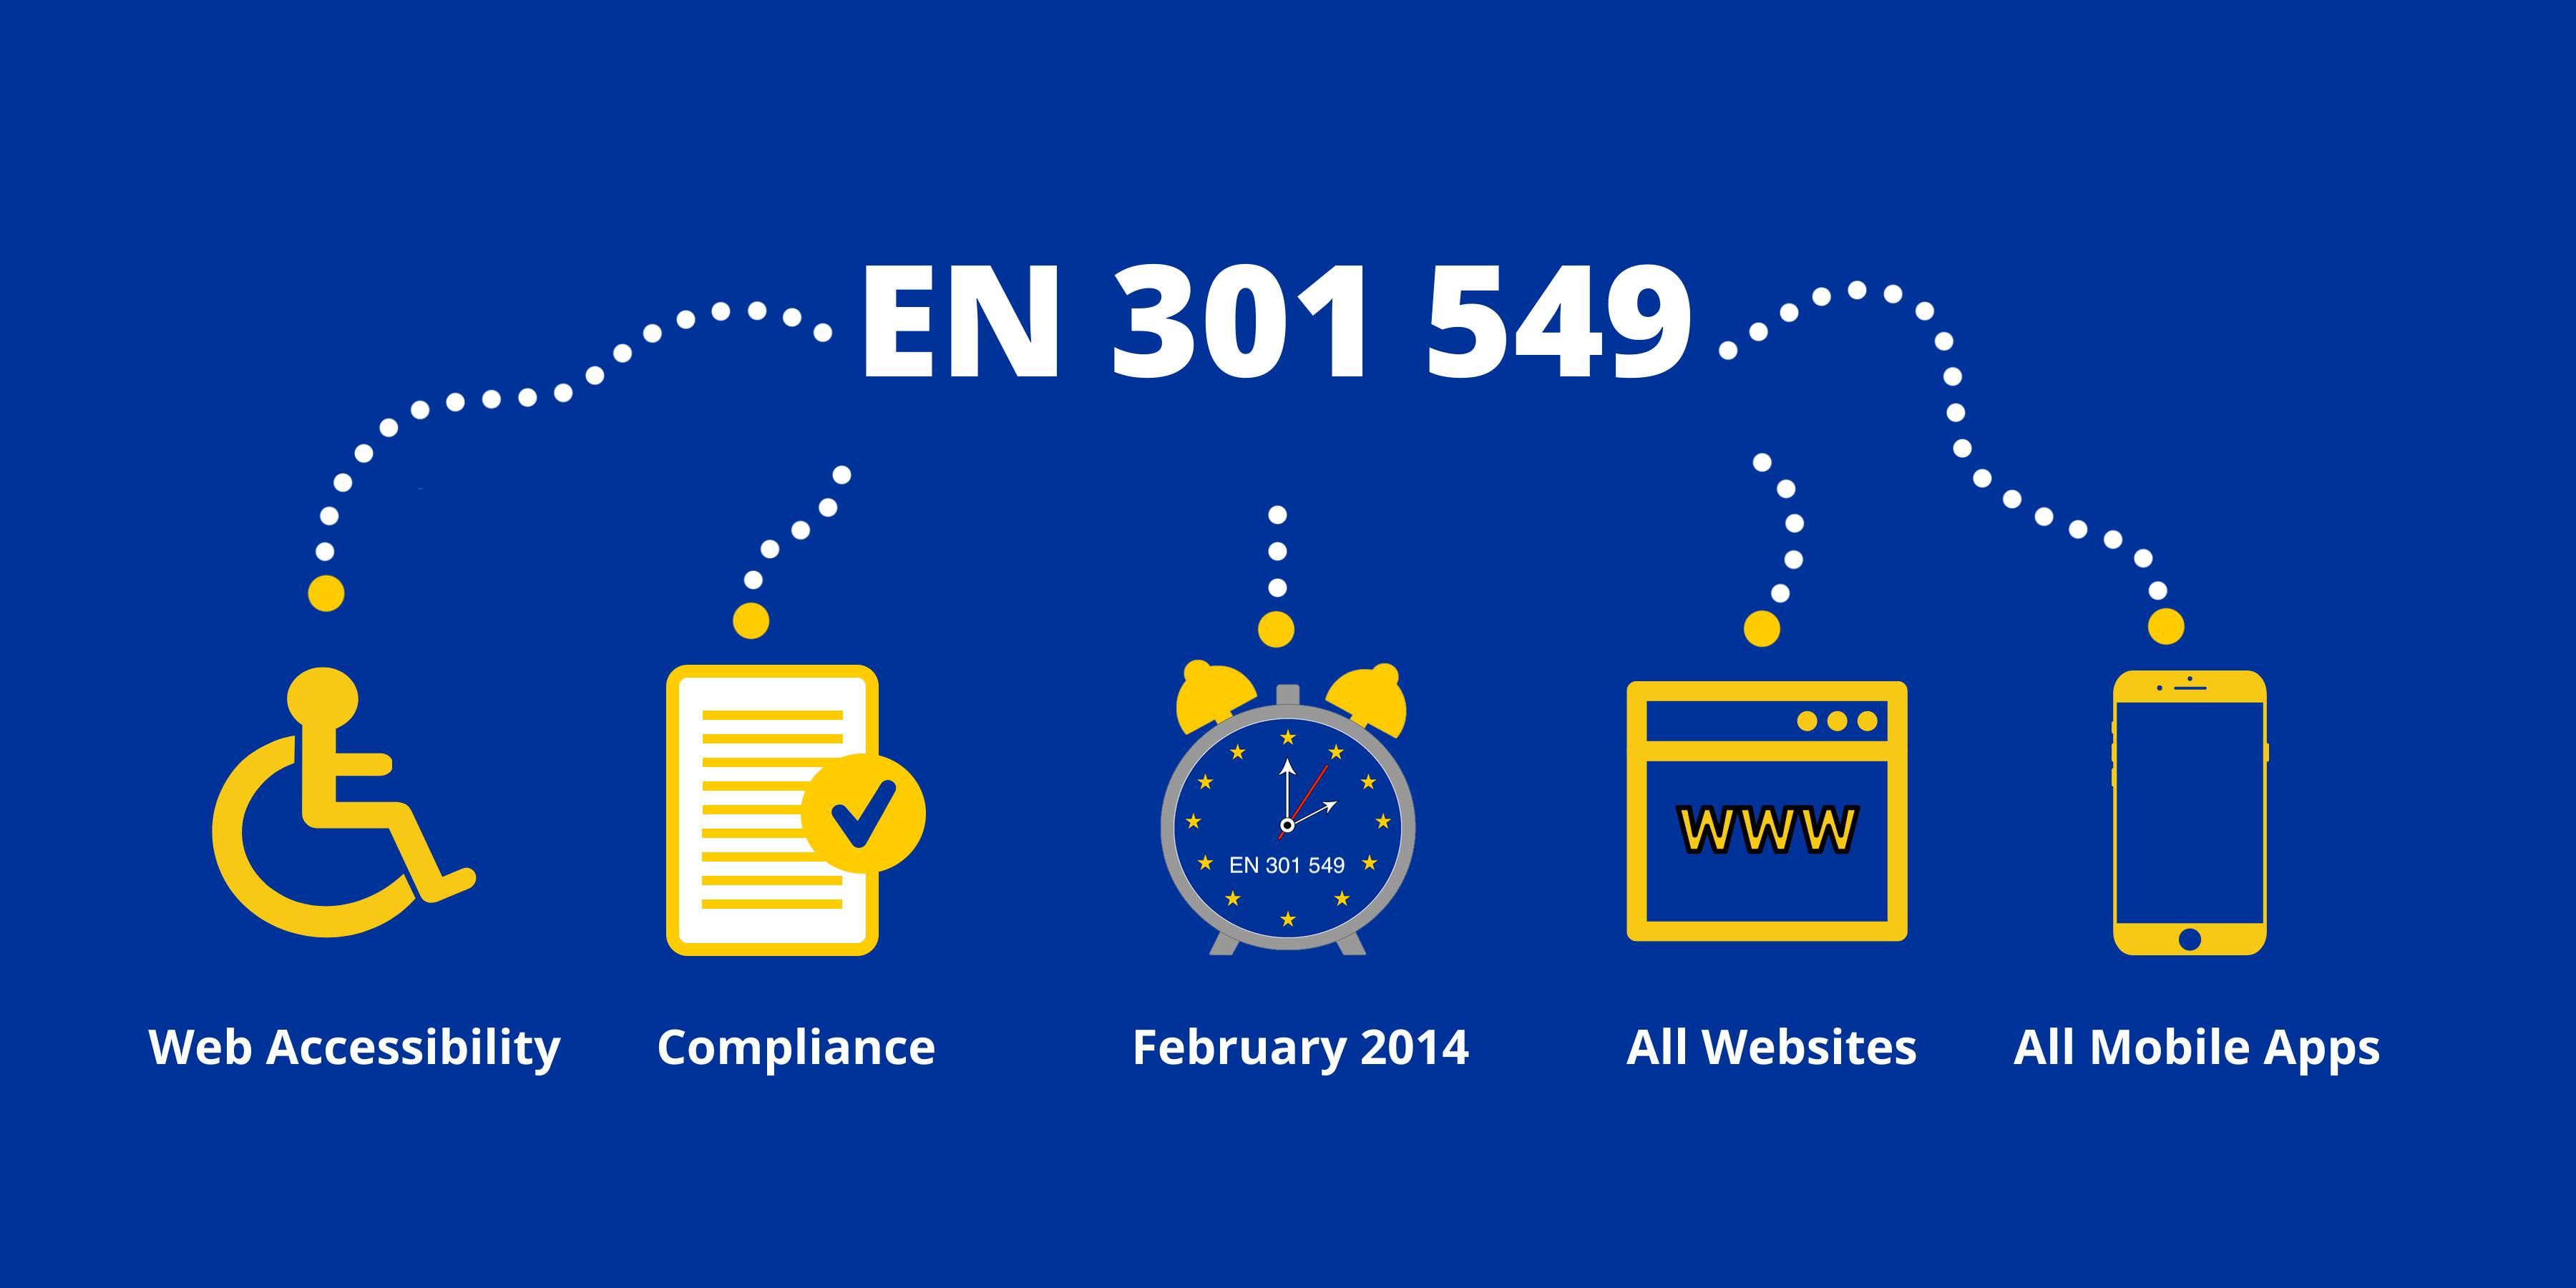 EN 301 549 Compliance Illustration links it with web accessibility, compliance and date of publication.